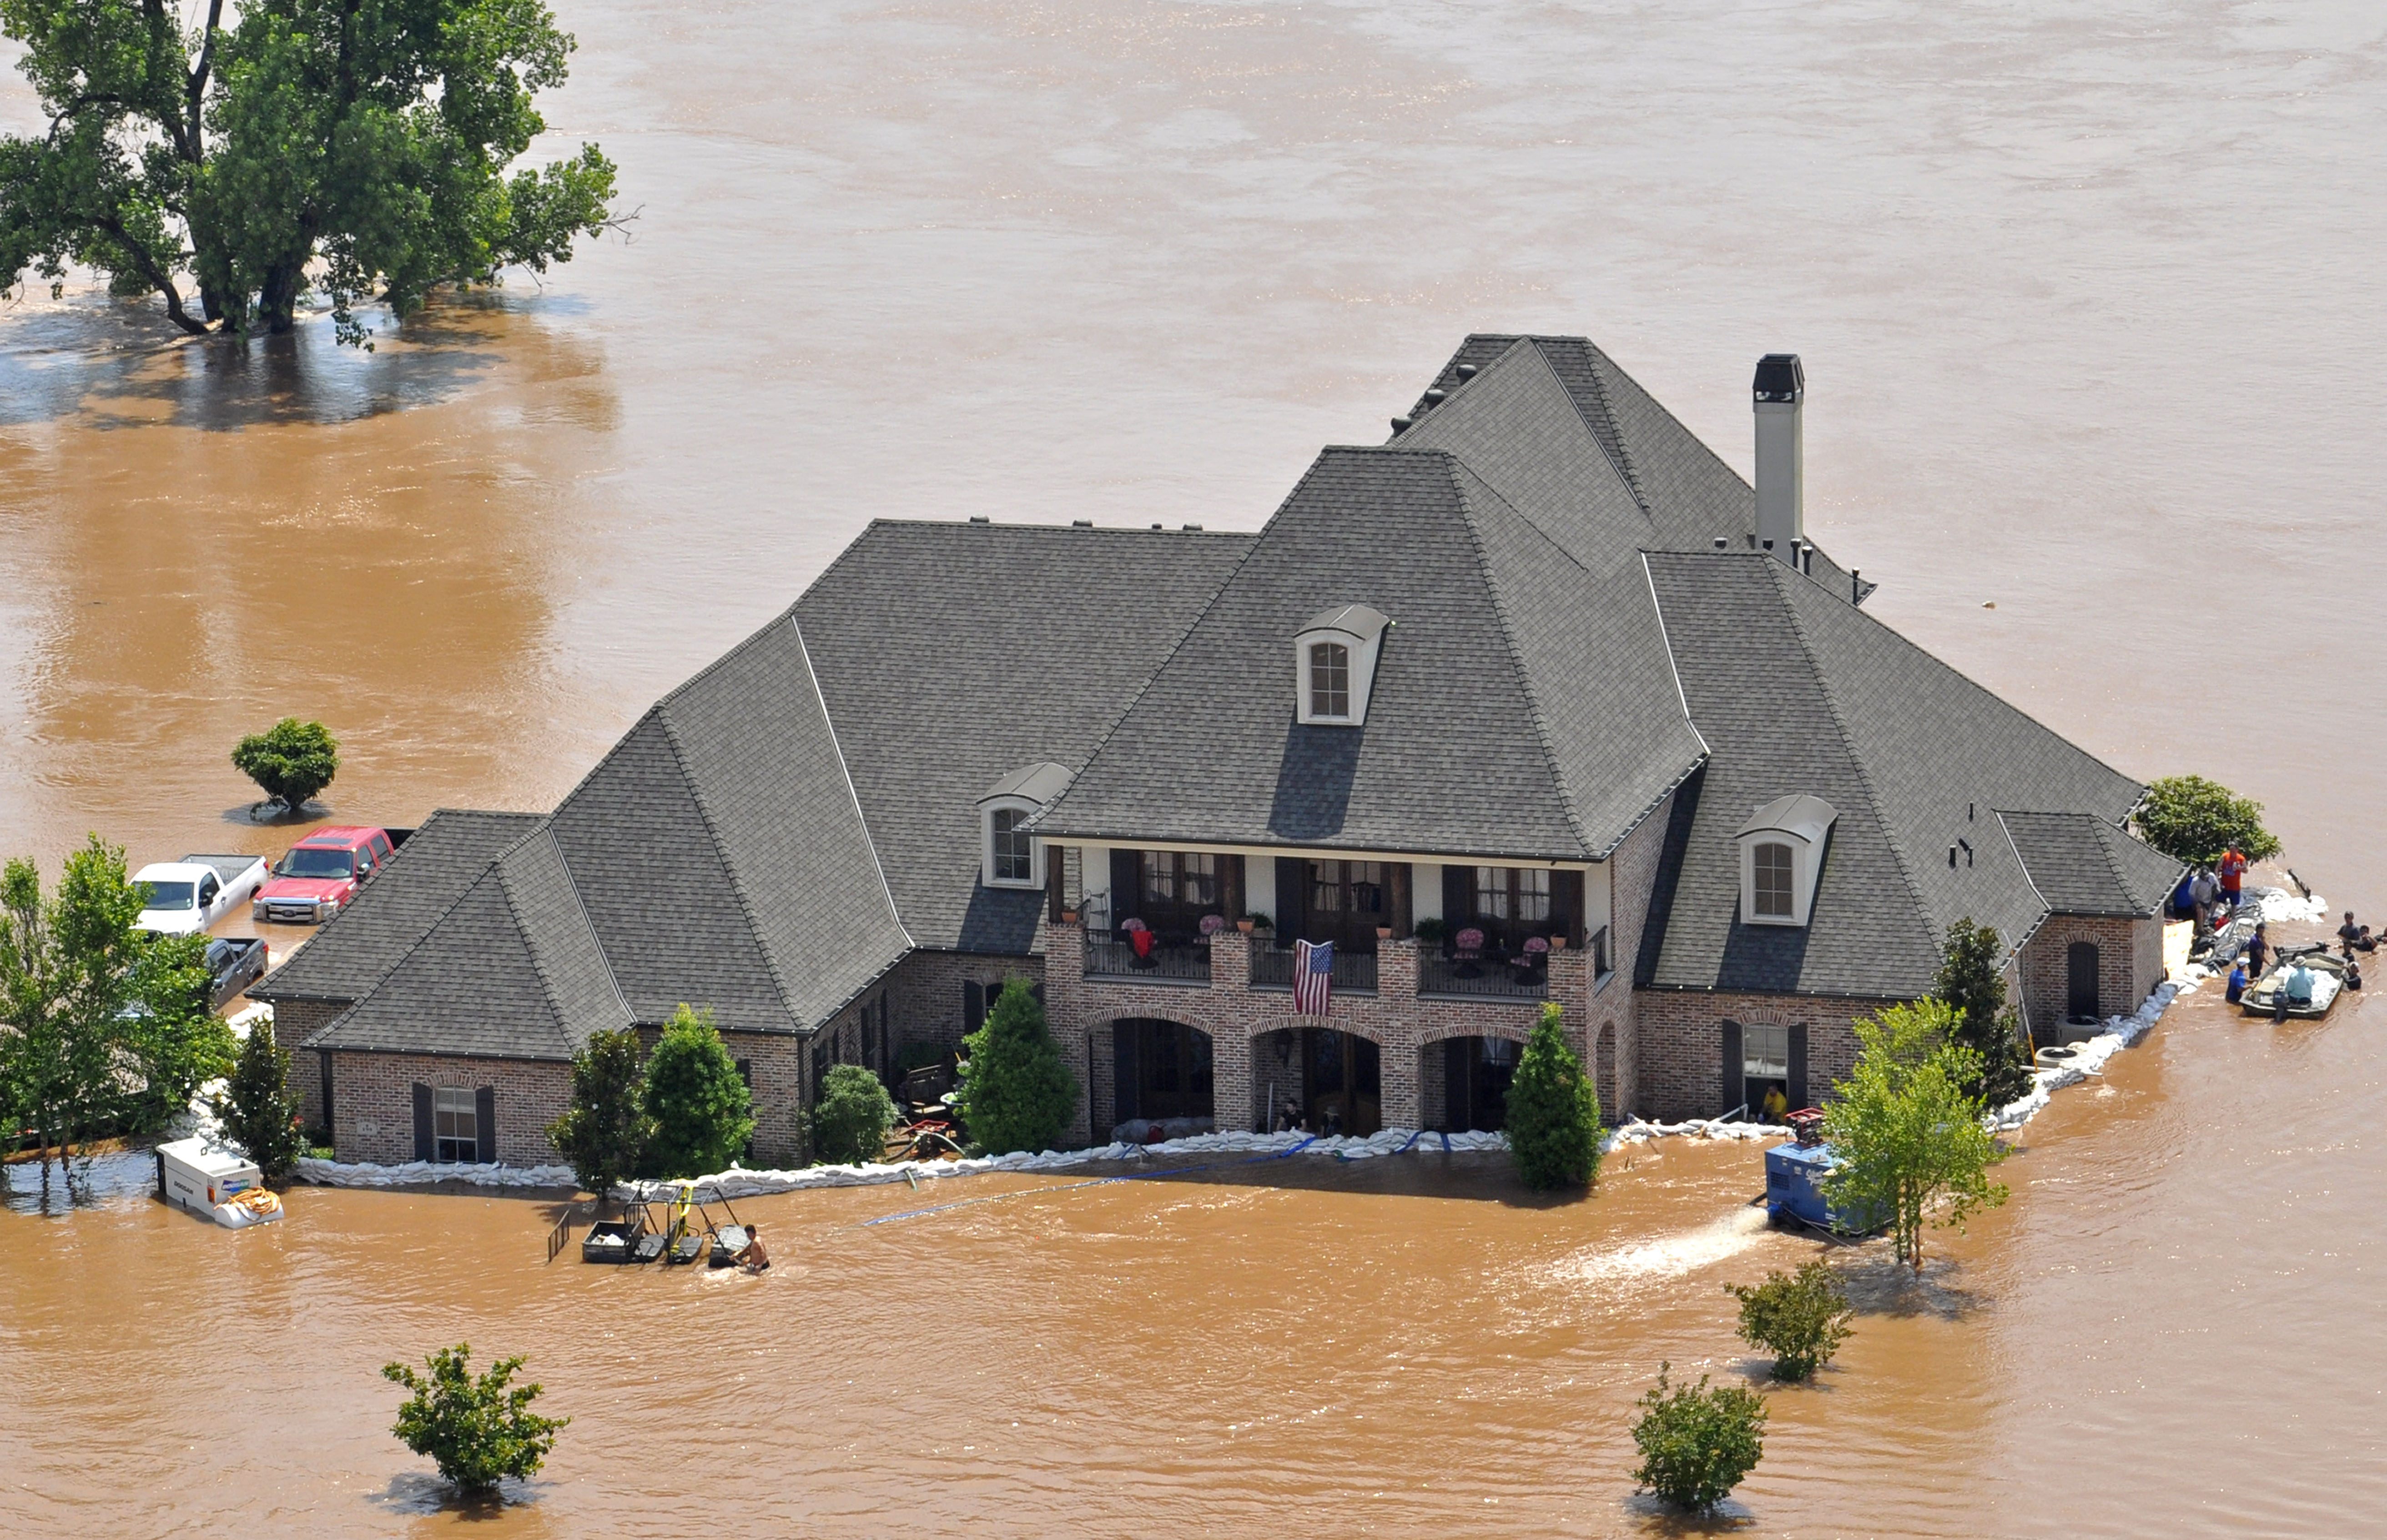 Sandbagged home during flooding from the Red River in the River Bluff subdivision of Bossier City, La., Monday, June 8, 2015